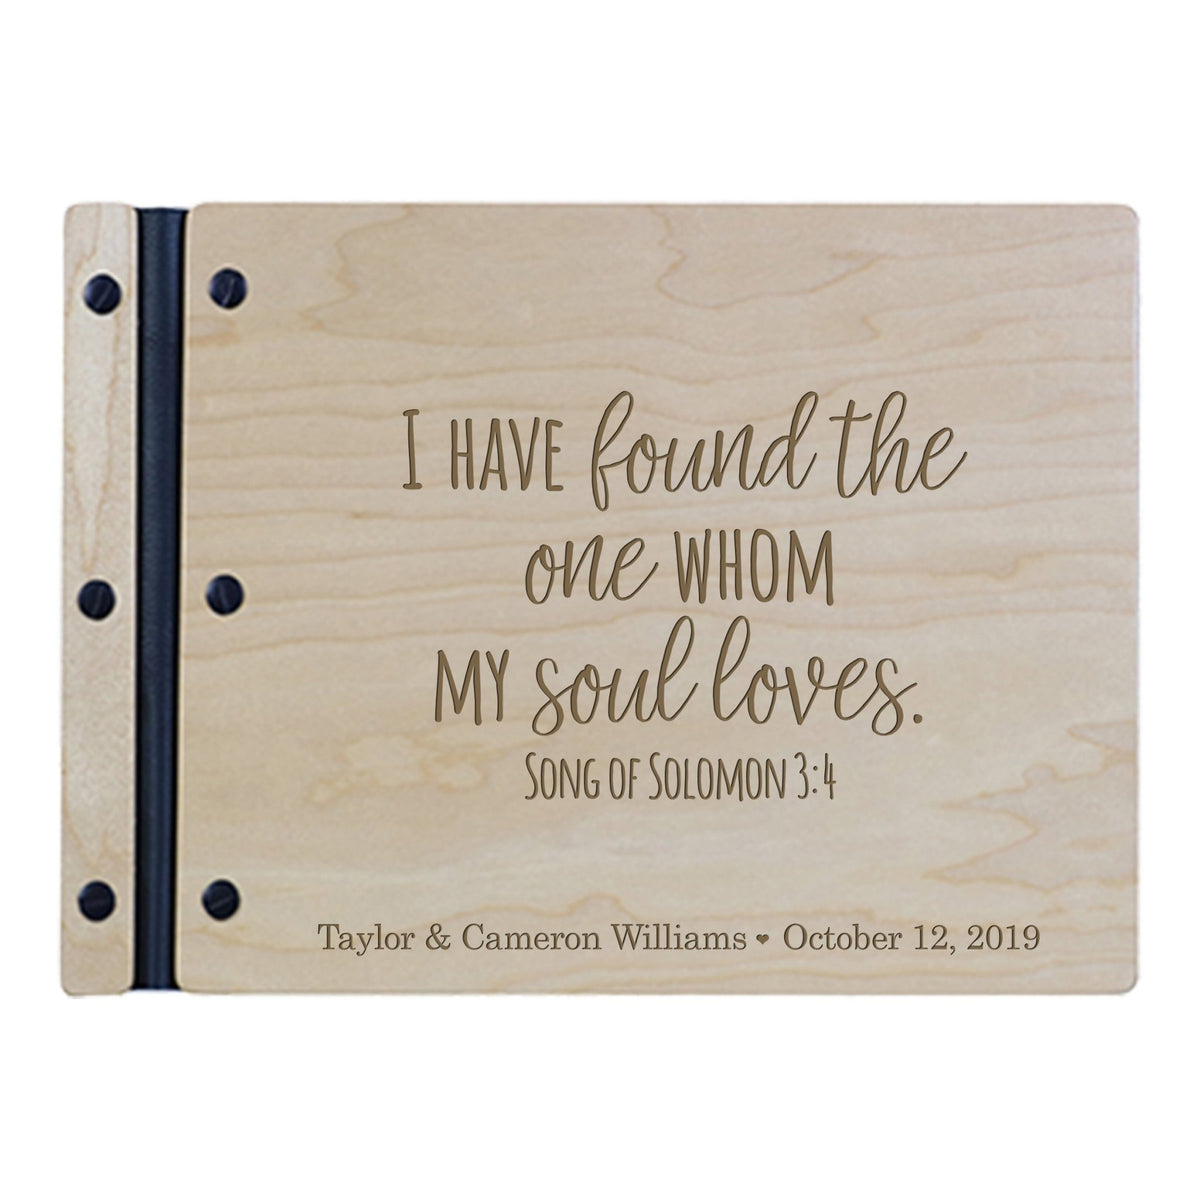 Custom Engraved Wooden Wedding Guest book 11” x 8.5” - I Have Found The One - LifeSong Milestones